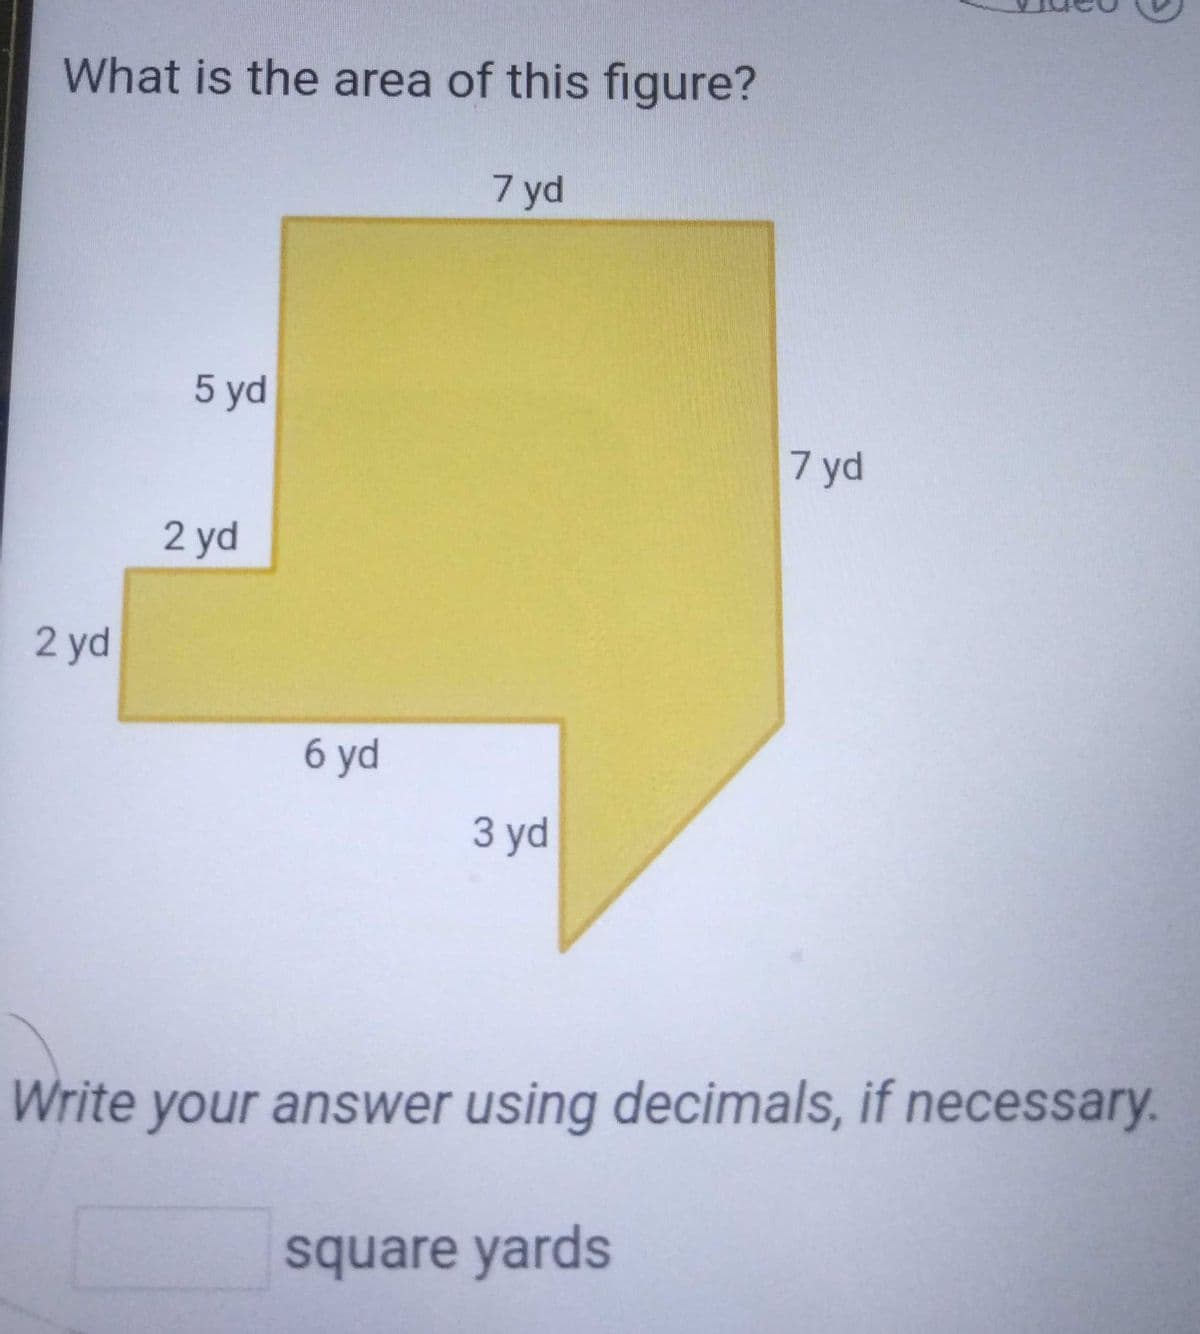 What is the area of this figure?
7 yd
2 yd
5 yd
2 yd
6 yd
3 yd
7 yd
Write your answer using decimals, if necessary.
square yards